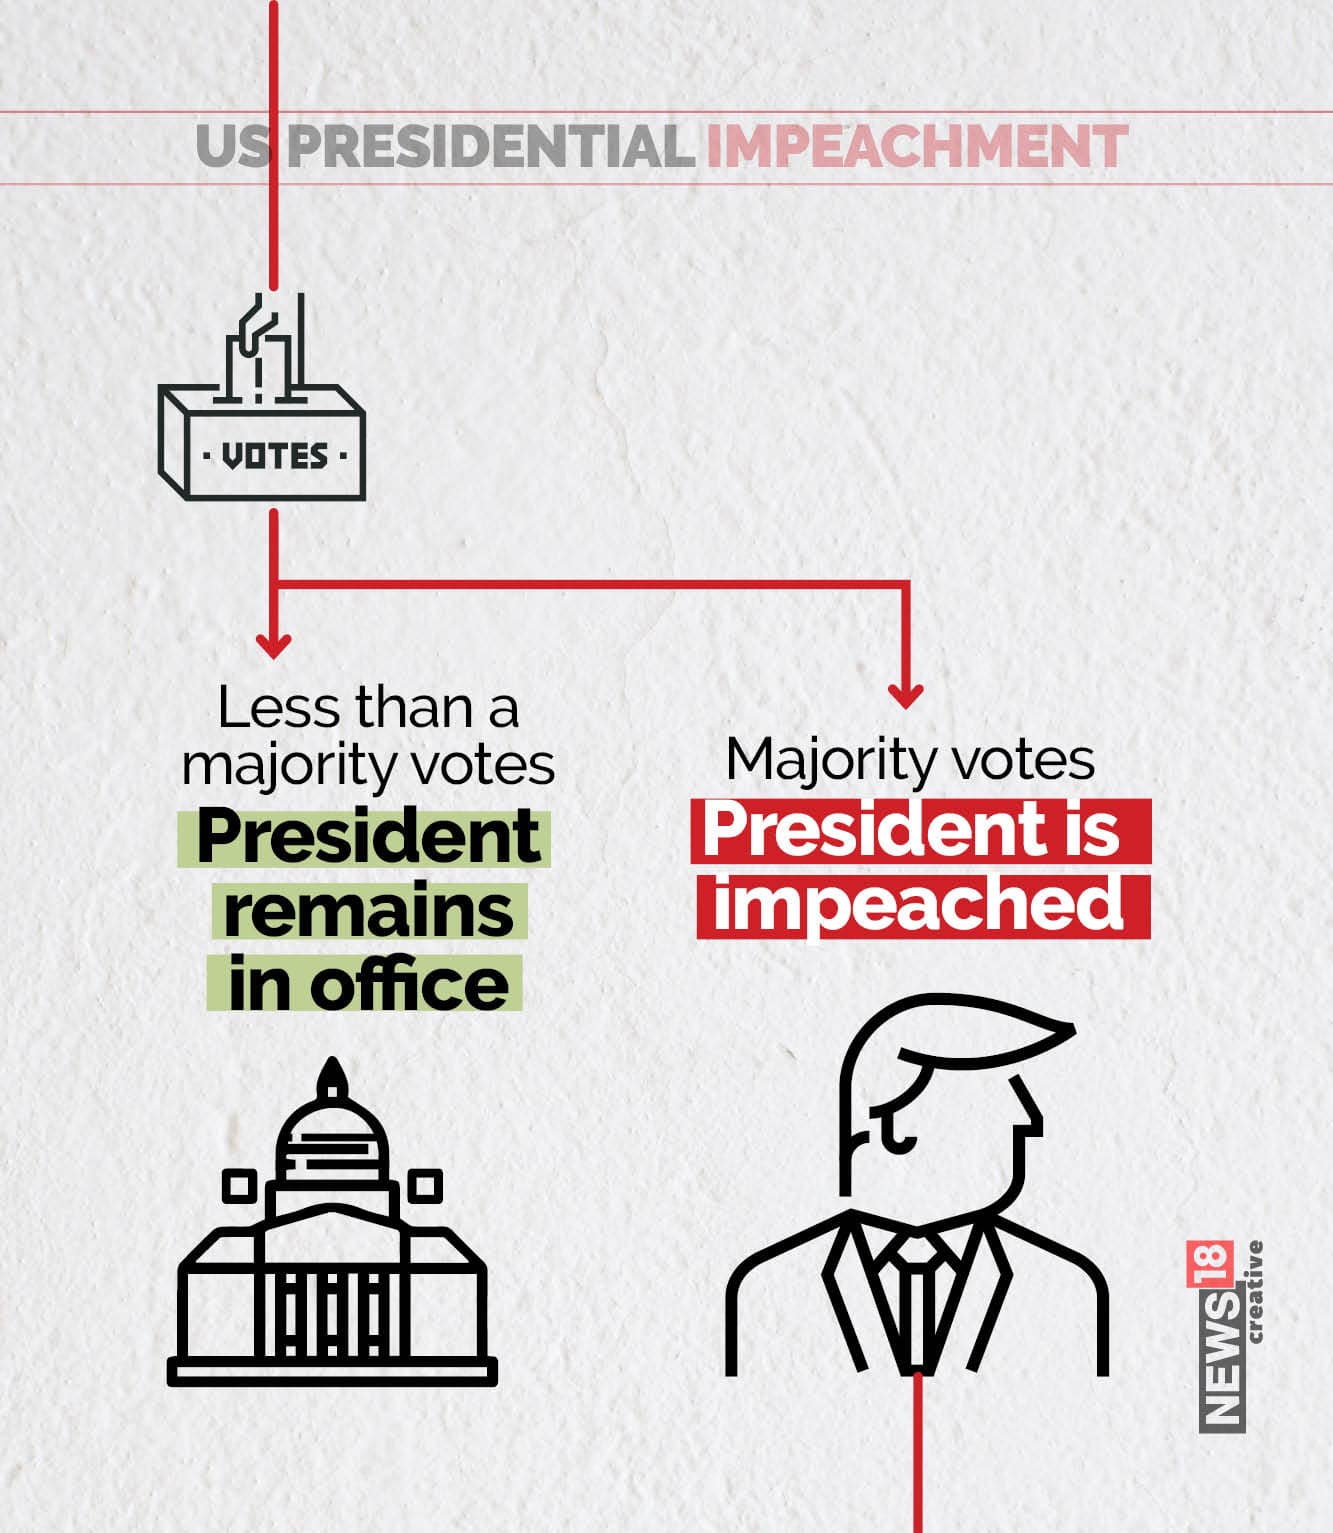 Here's a look at the presidential impeachment process in United States